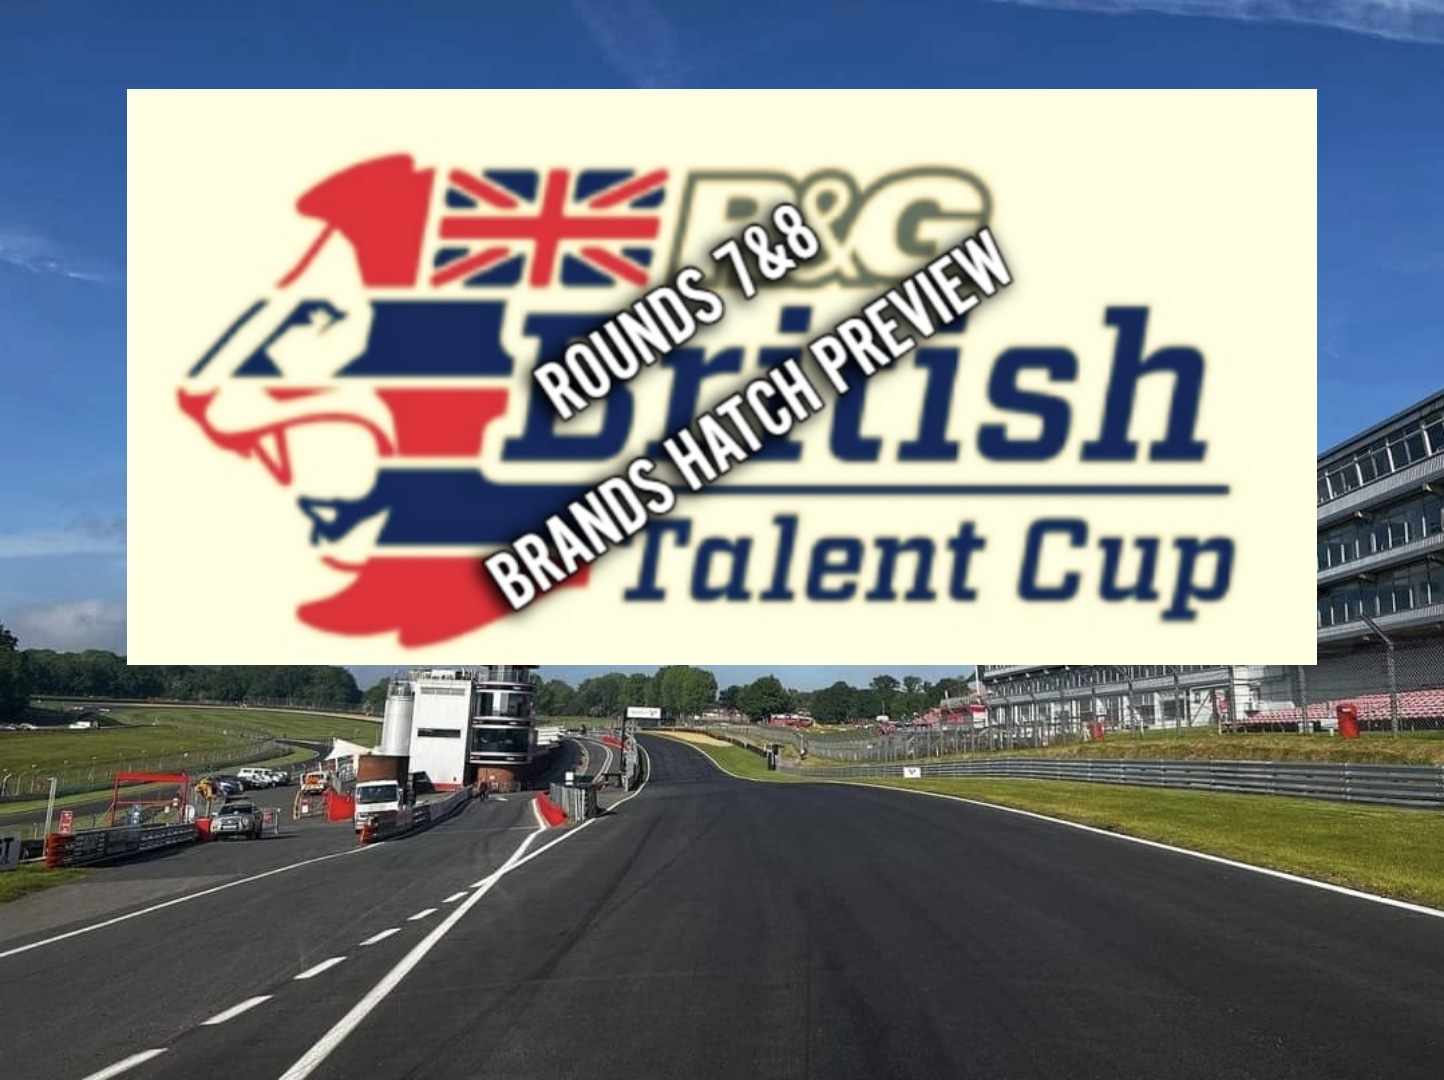 Featured image for “BTC: A look ahead to The R&G British Talent Cup Rounds Seven & Eight, At Both Rider’s and Spectators Favourite Circuit of Brands Hatch.”